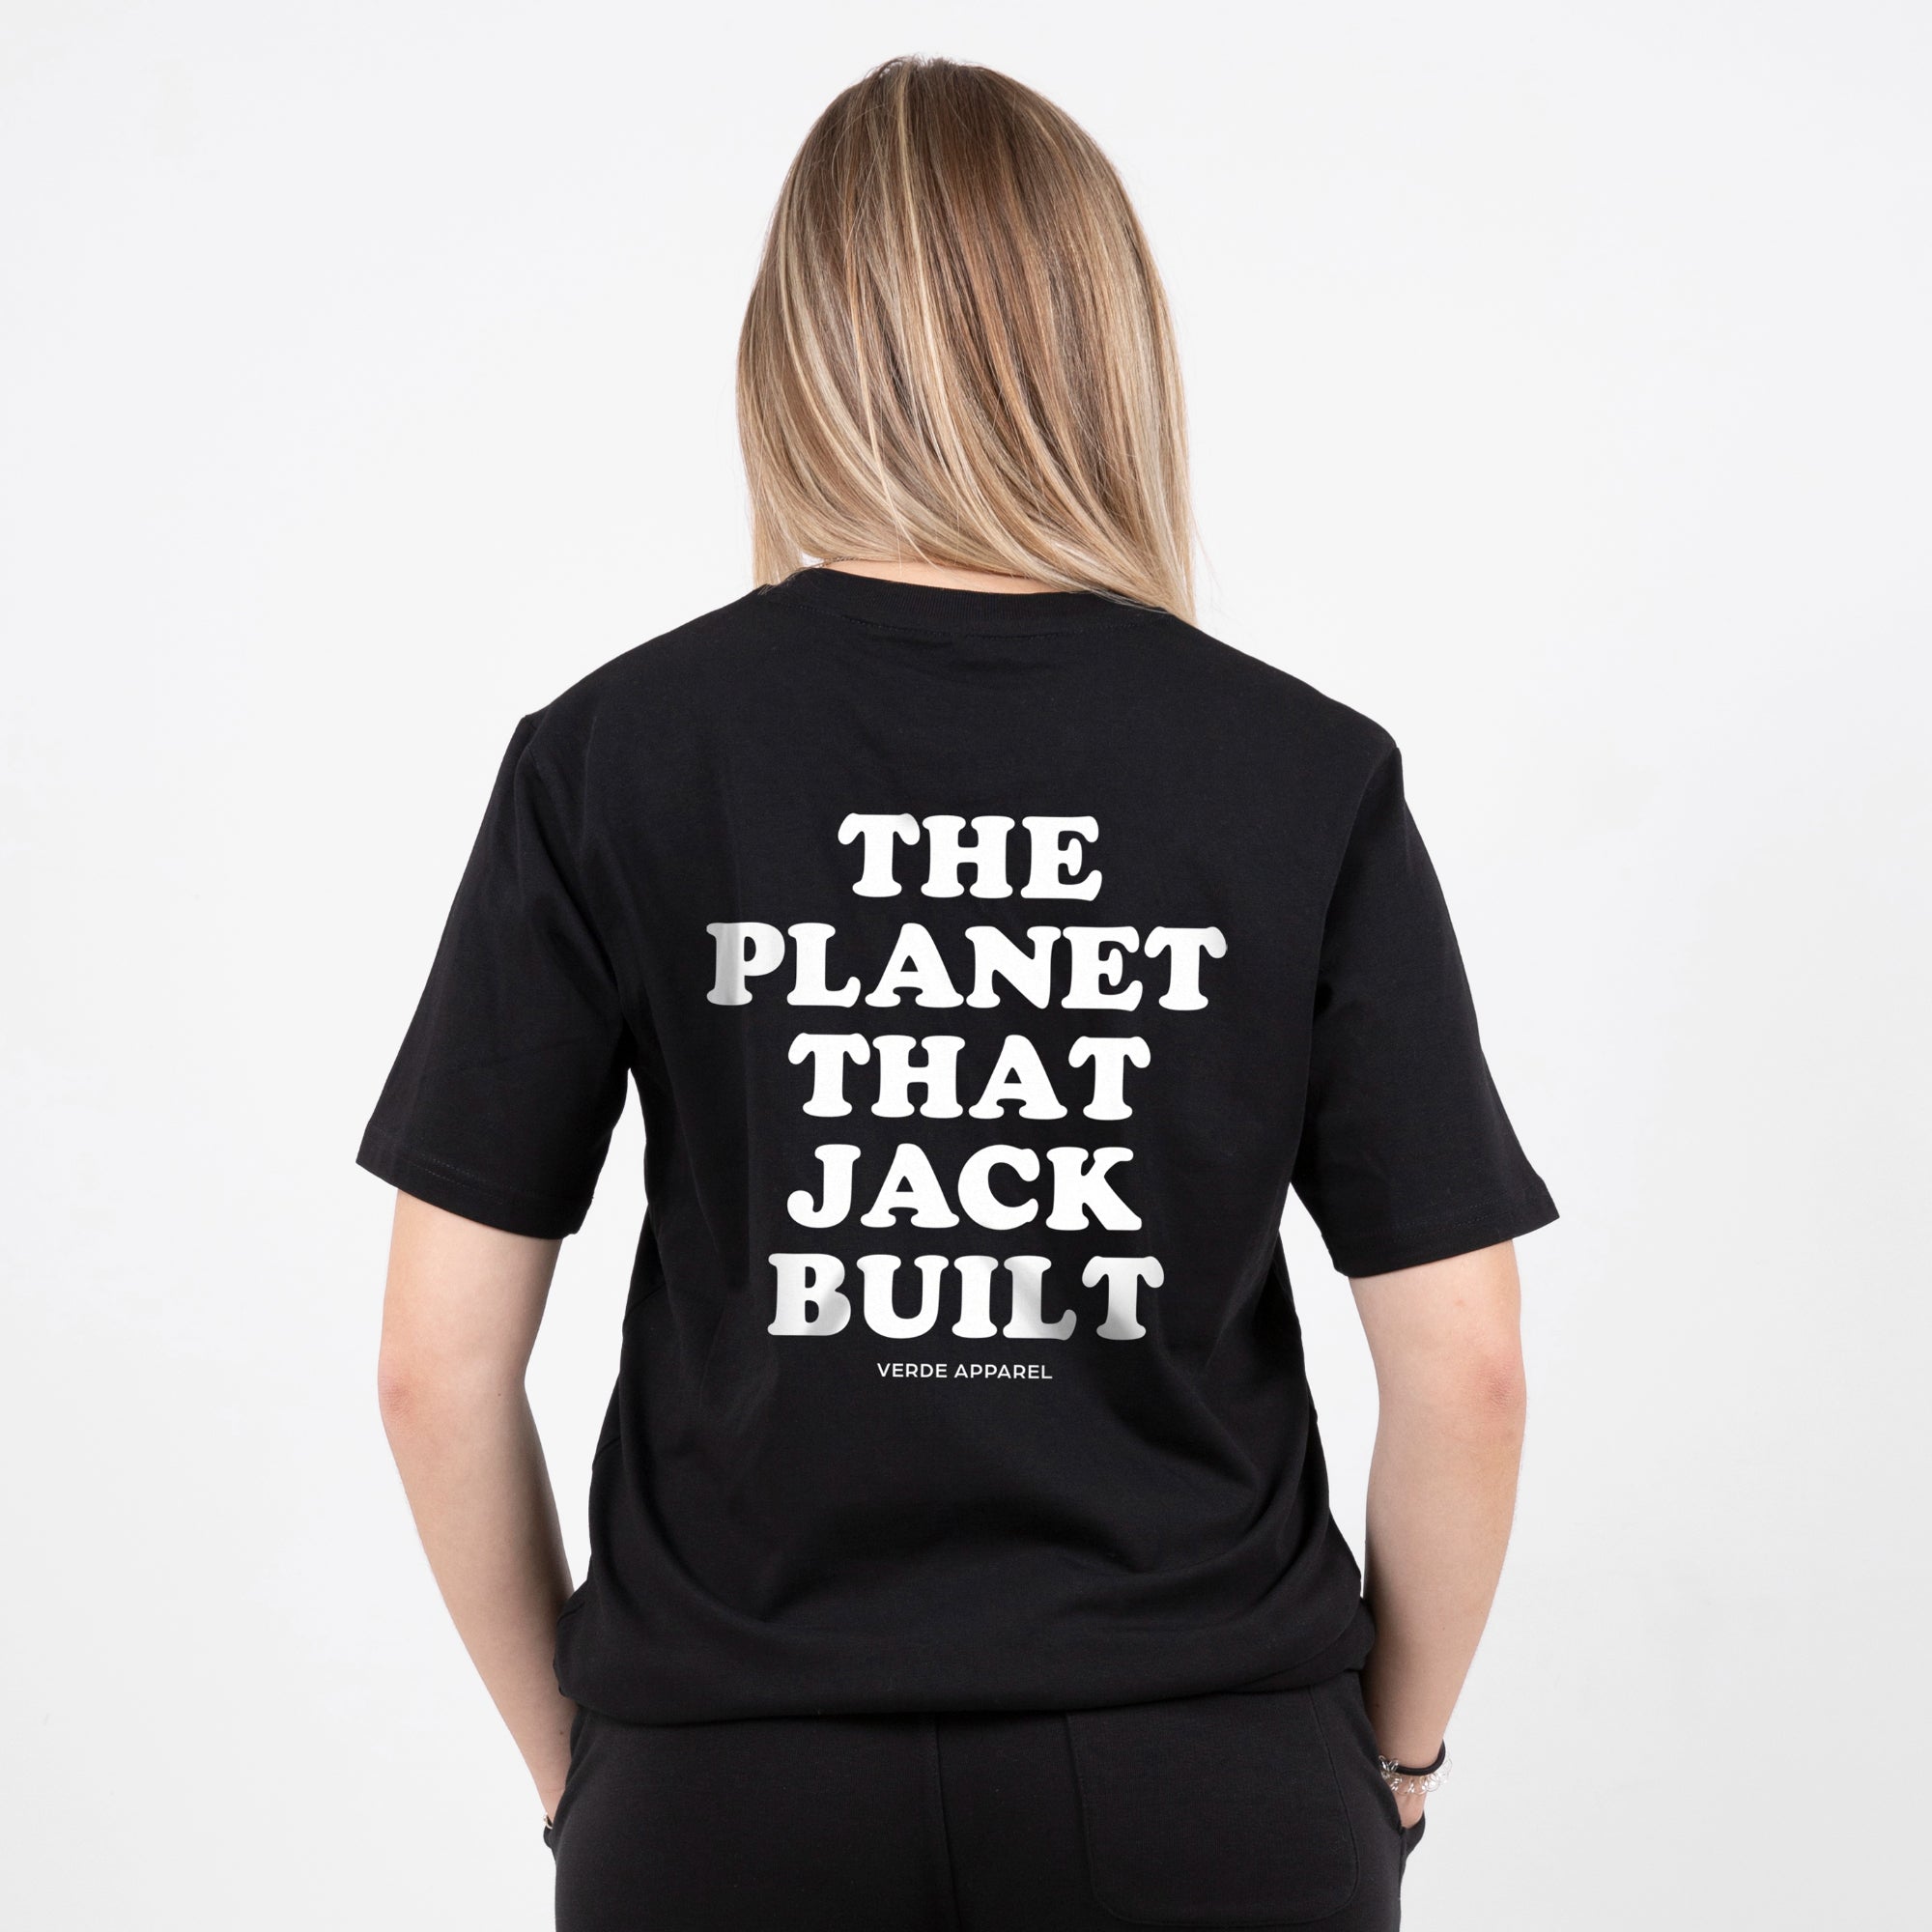 The Planet That Jack Built Tee